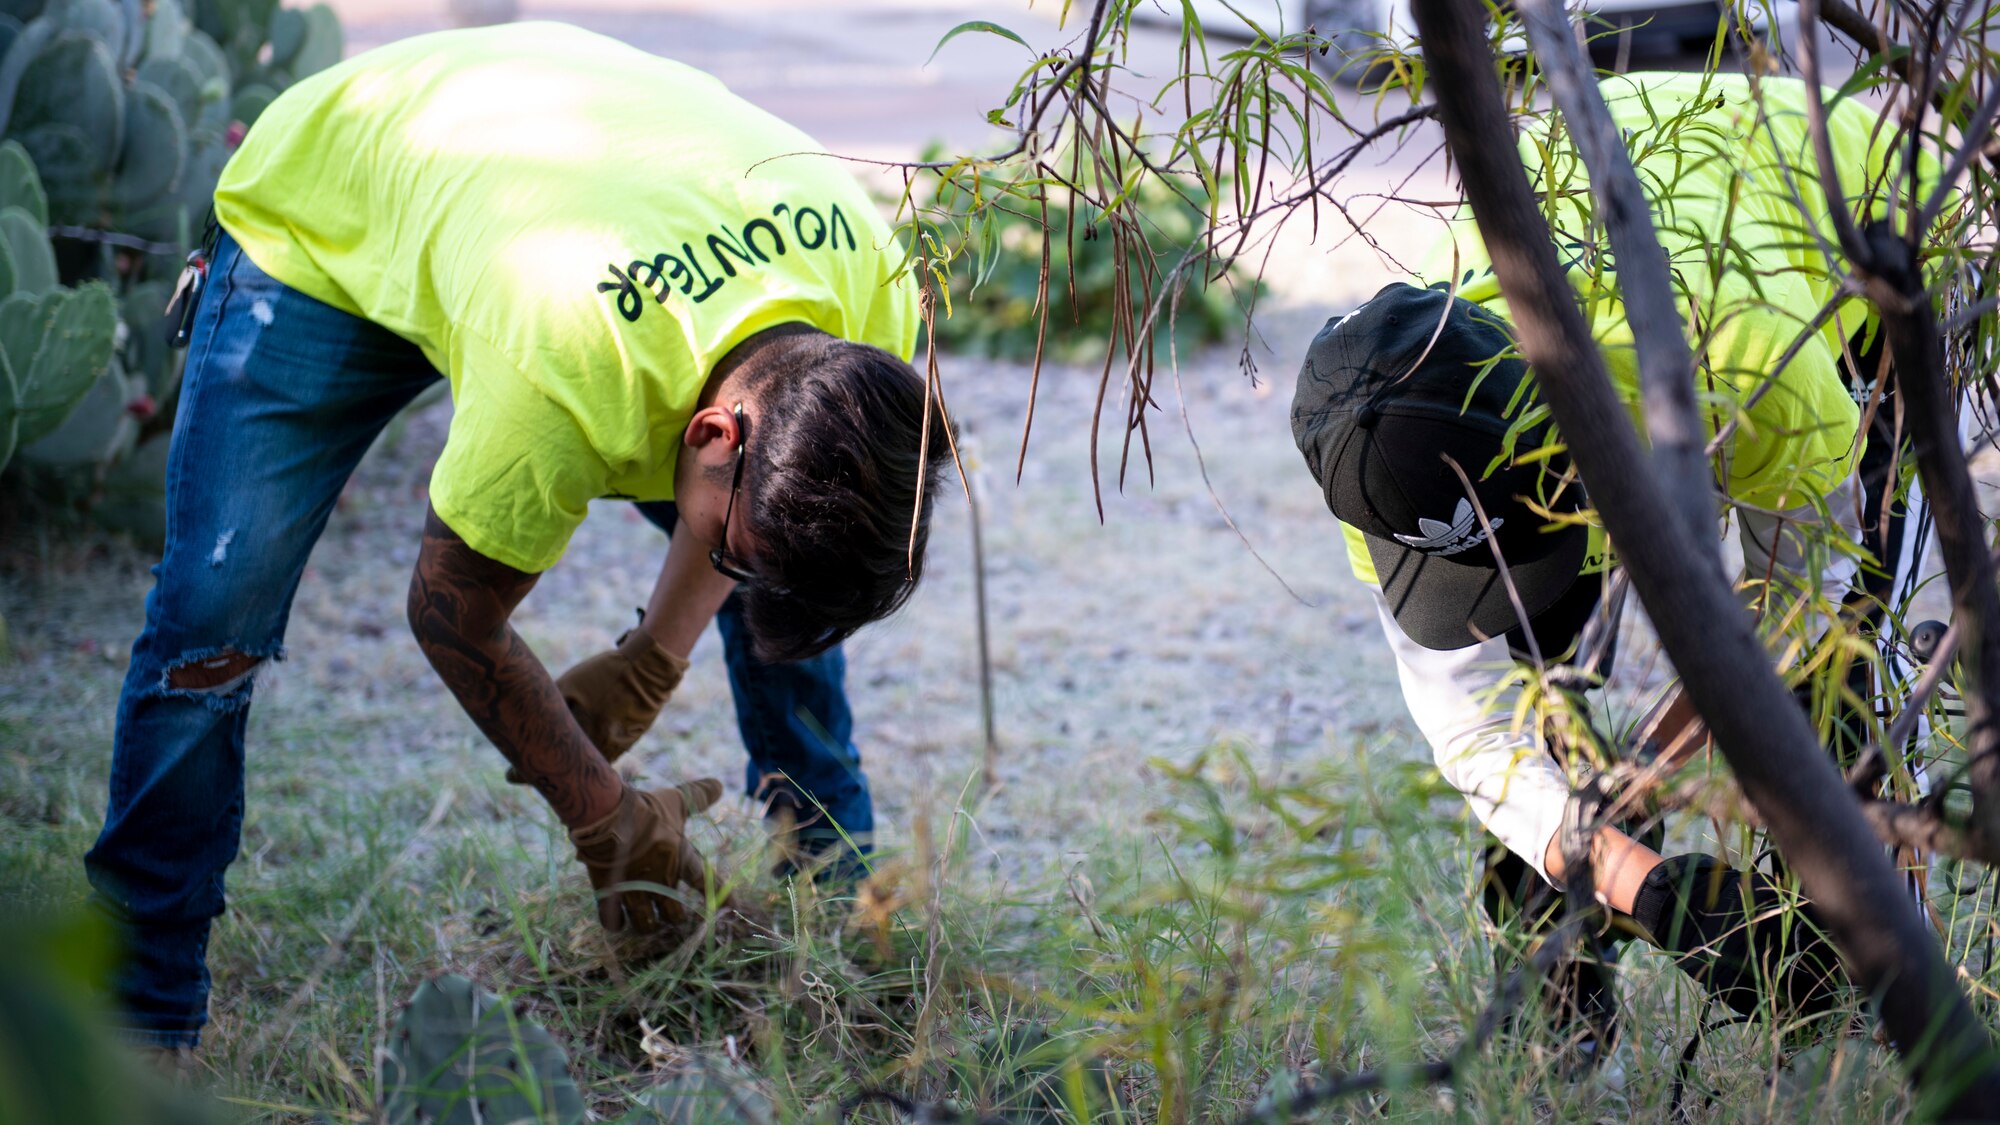 Two people in bright green volunteer shirts pull weeds out of the ground.